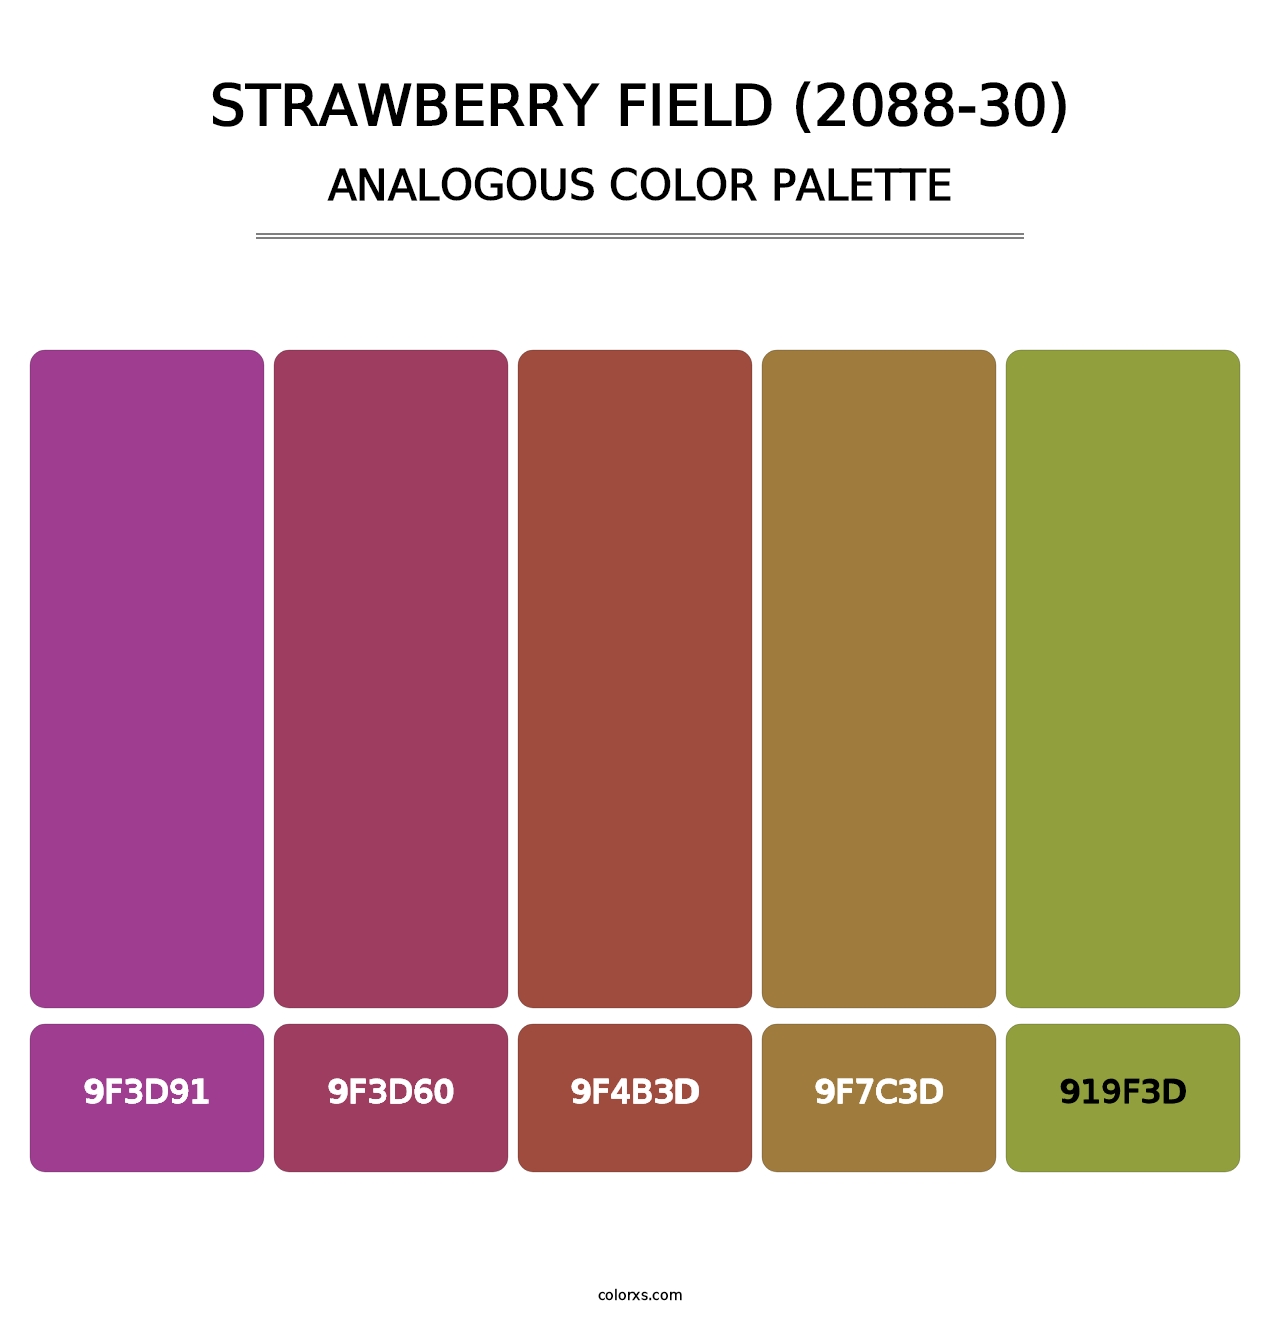 Strawberry Field (2088-30) - Analogous Color Palette